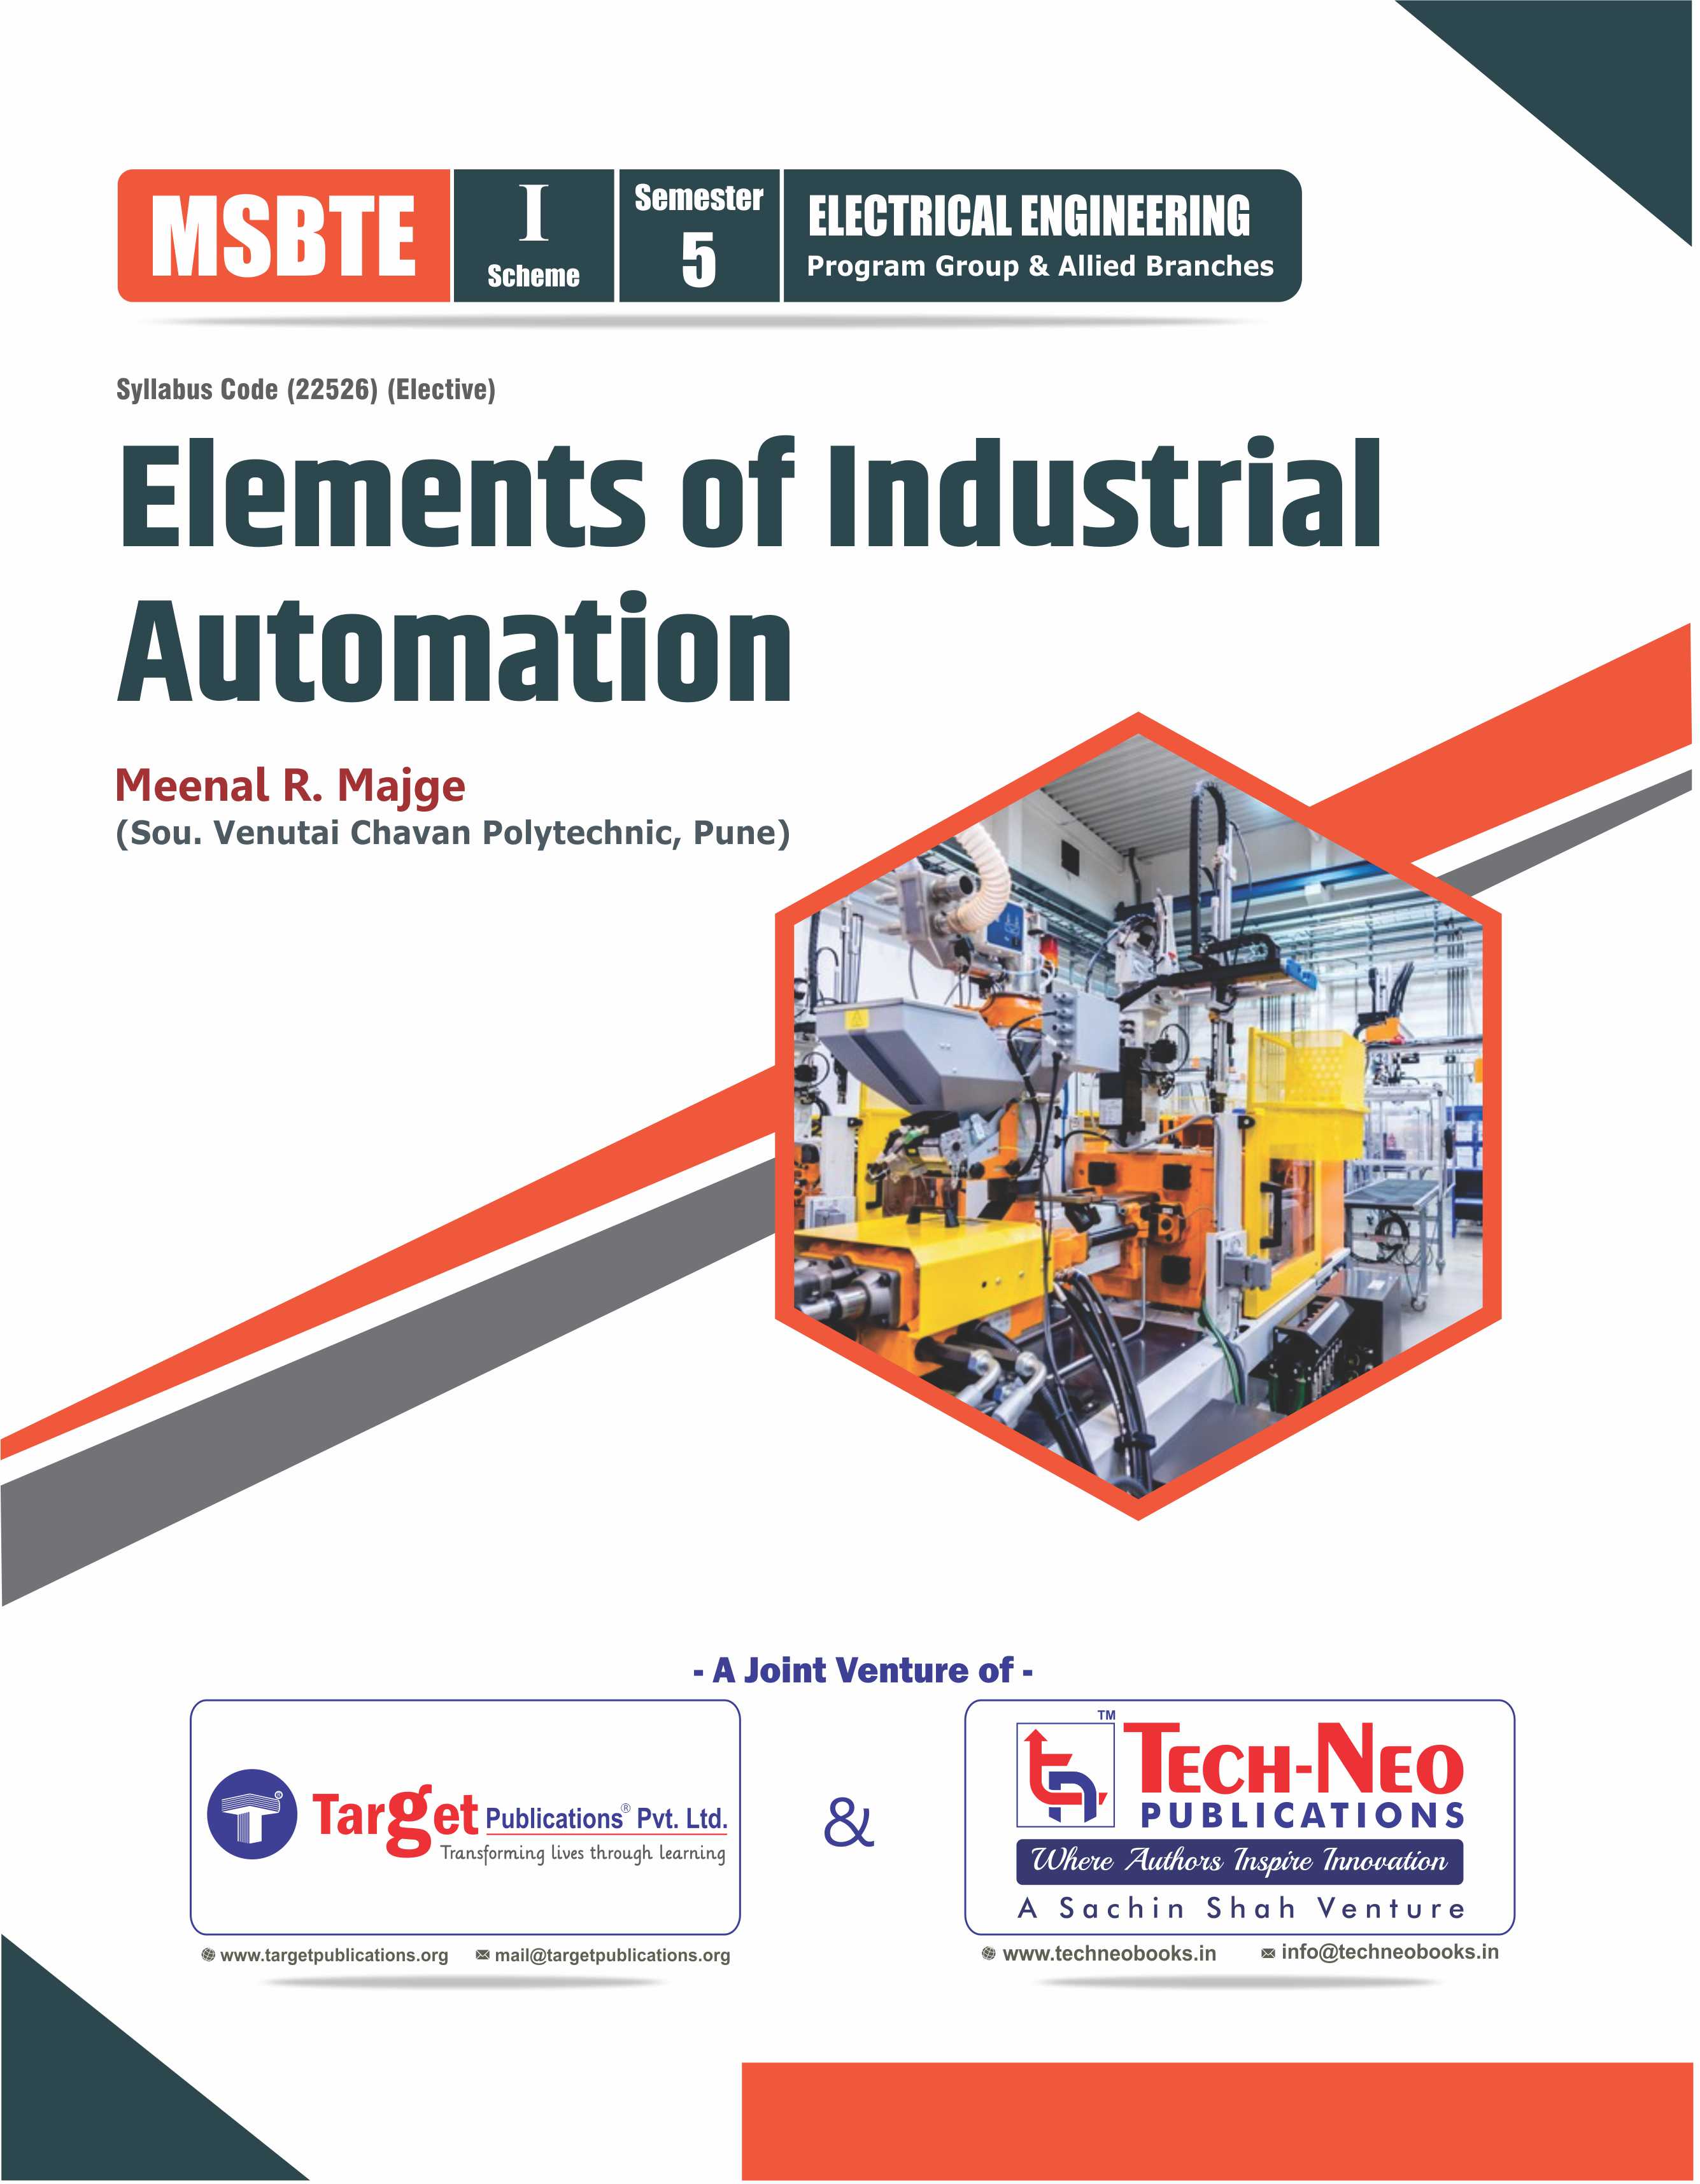 Elements of Industrial Automation